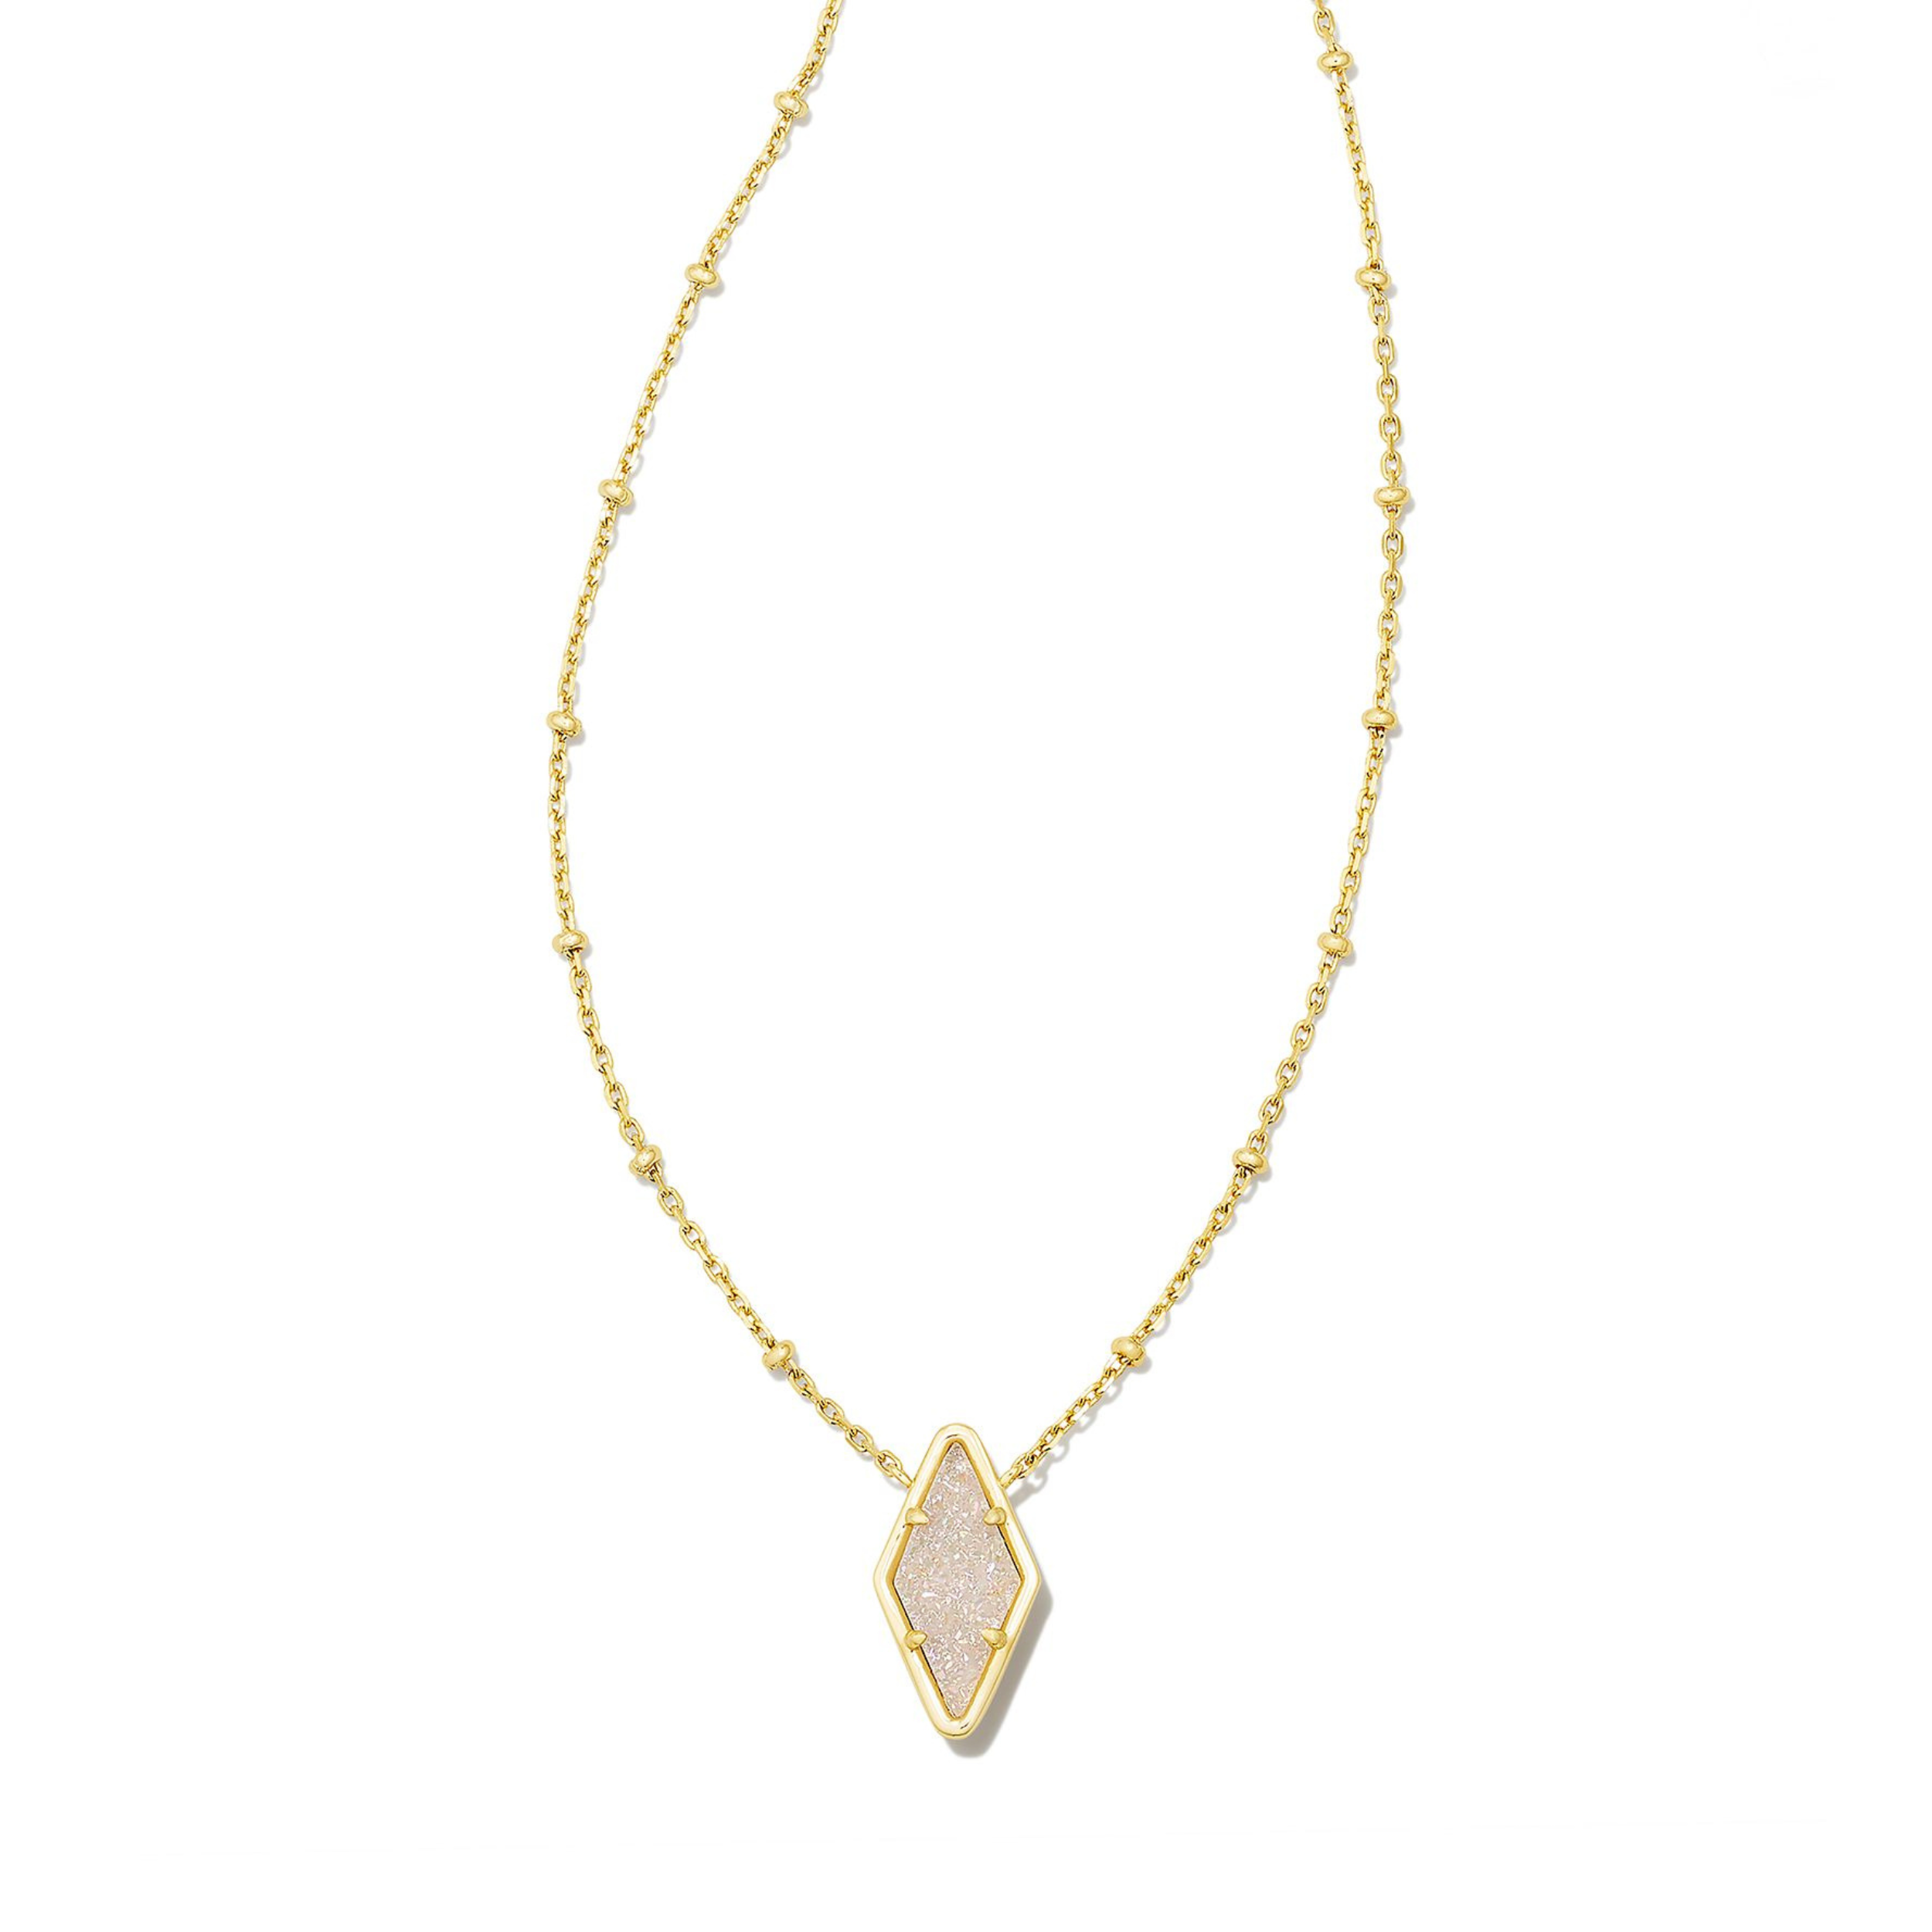 Gold necklace with diamond shaped pendant in iridescent drusy pictured on a white background.